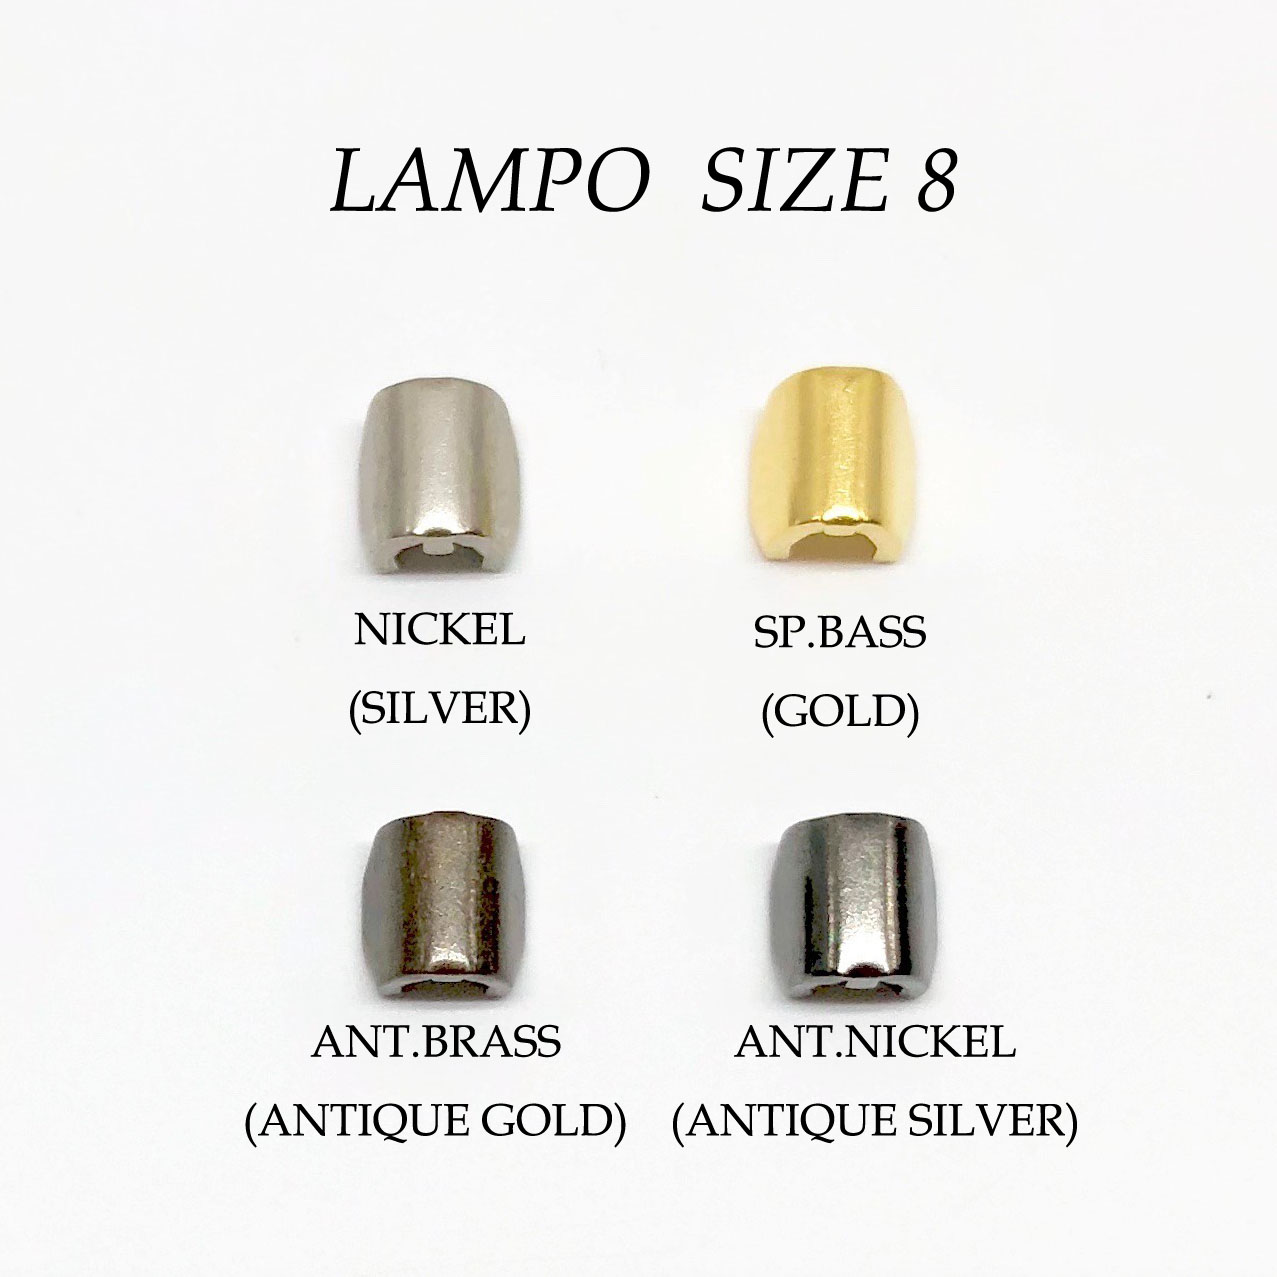 183S Super LAMPO Zipper Top Stop For Size 8 Only LAMPO(GIOVANNI LANFRANCHI SPA)